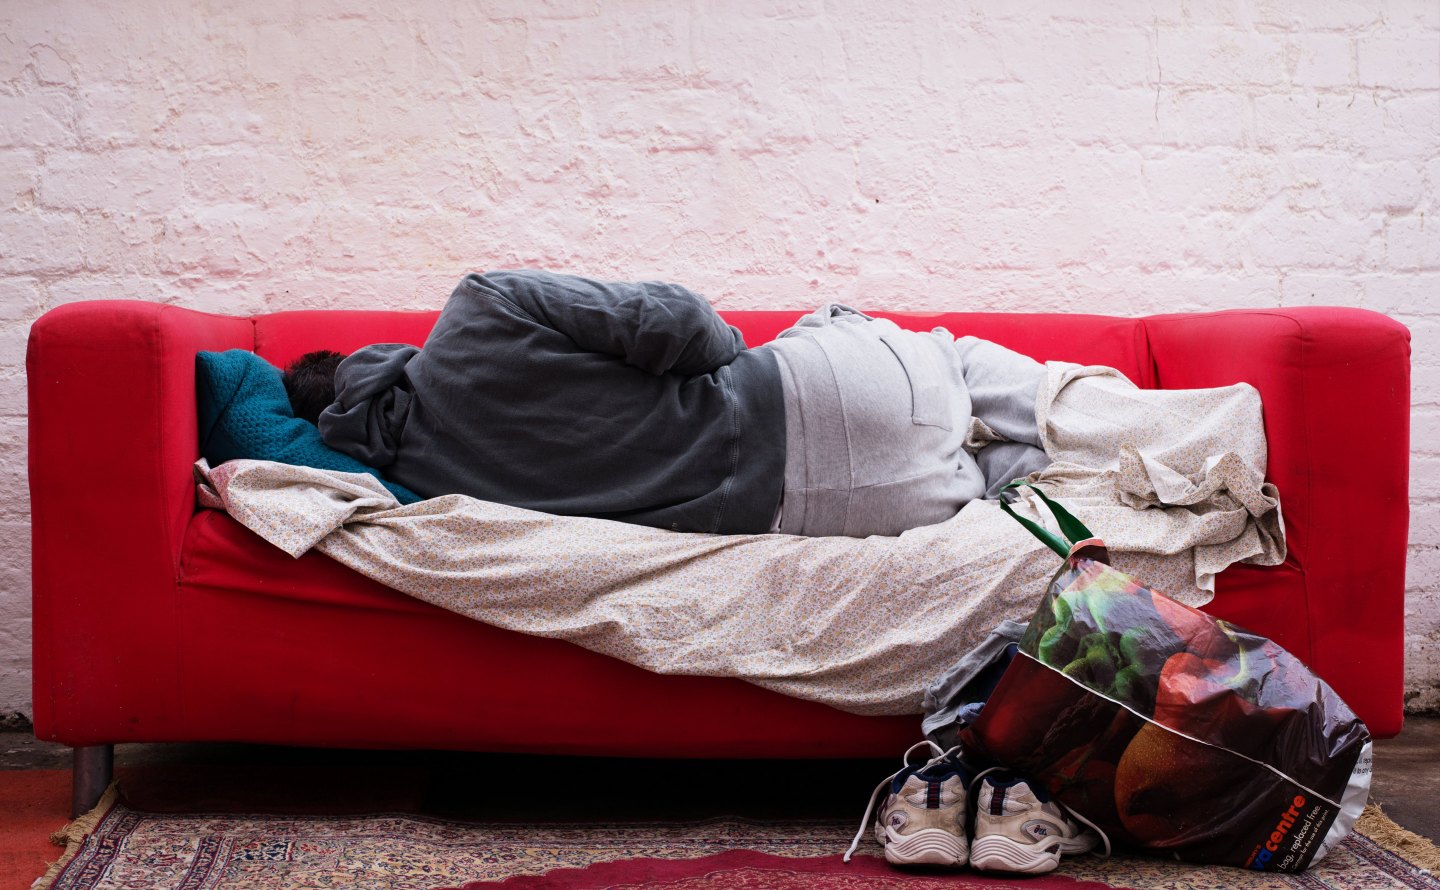 Hidden Homeless - ideas competition underway to tackle the urgent plight of young people in London